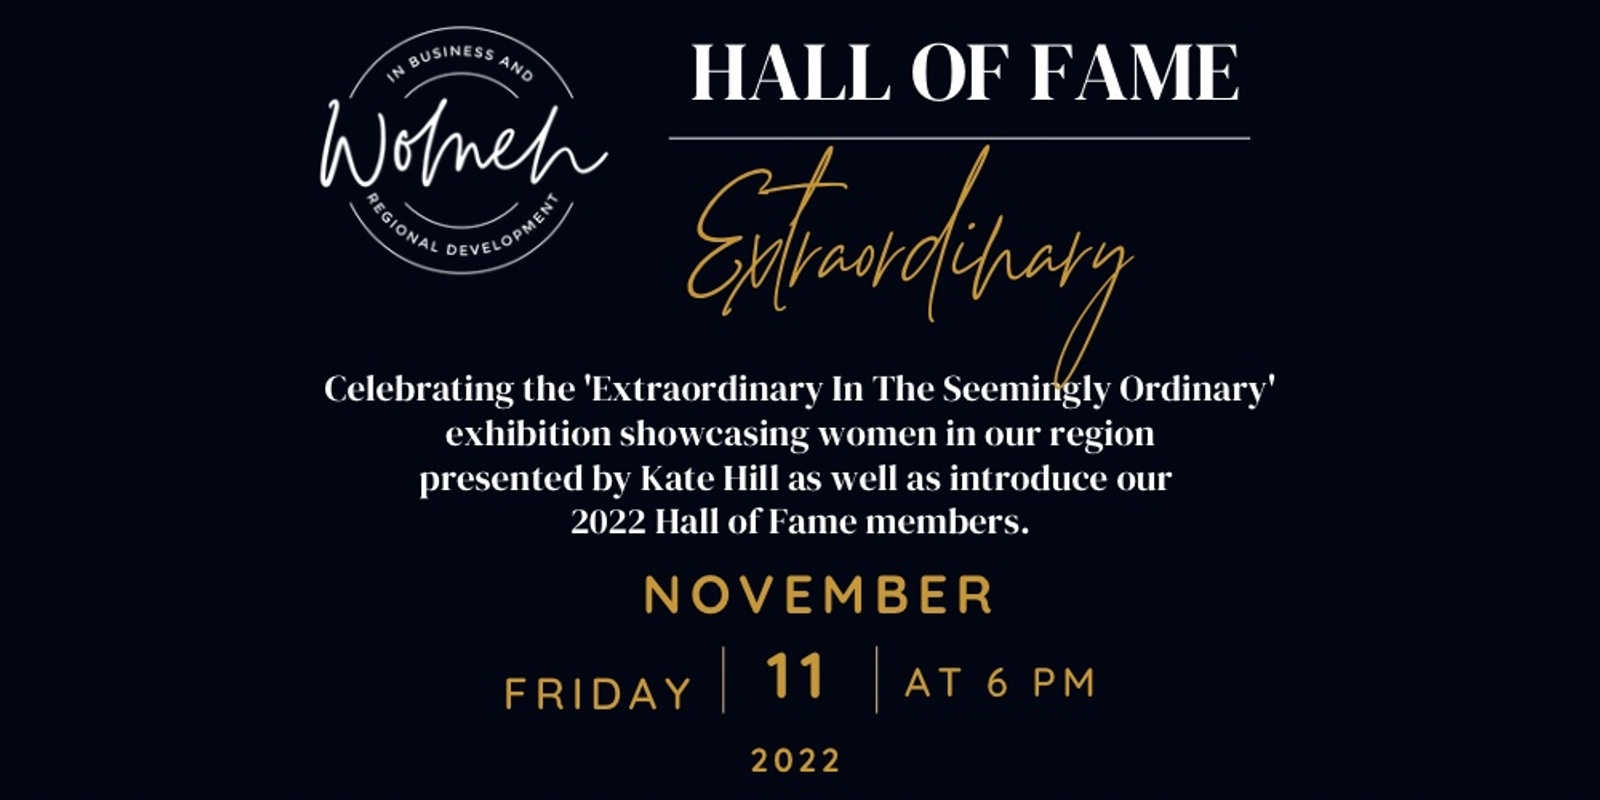 WiBRD Hall of Fame “The Extraordinary”